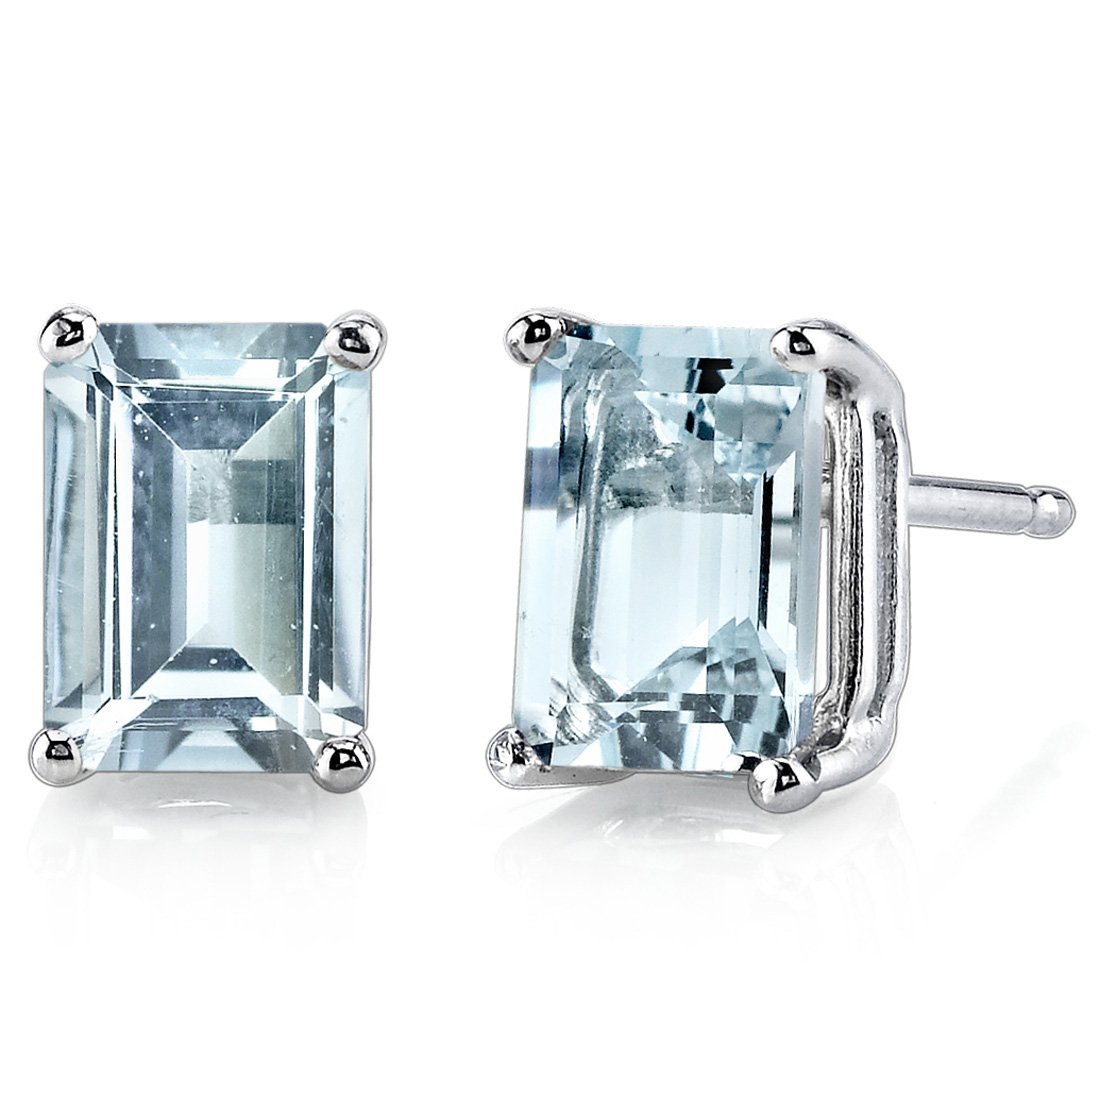 Peora Aquamarine Earrings for Women in 14 Karat White Gold, Classic Solitaire Studs, 7x5mm Radiant Cut, 1.75 Carats total, Friction Back